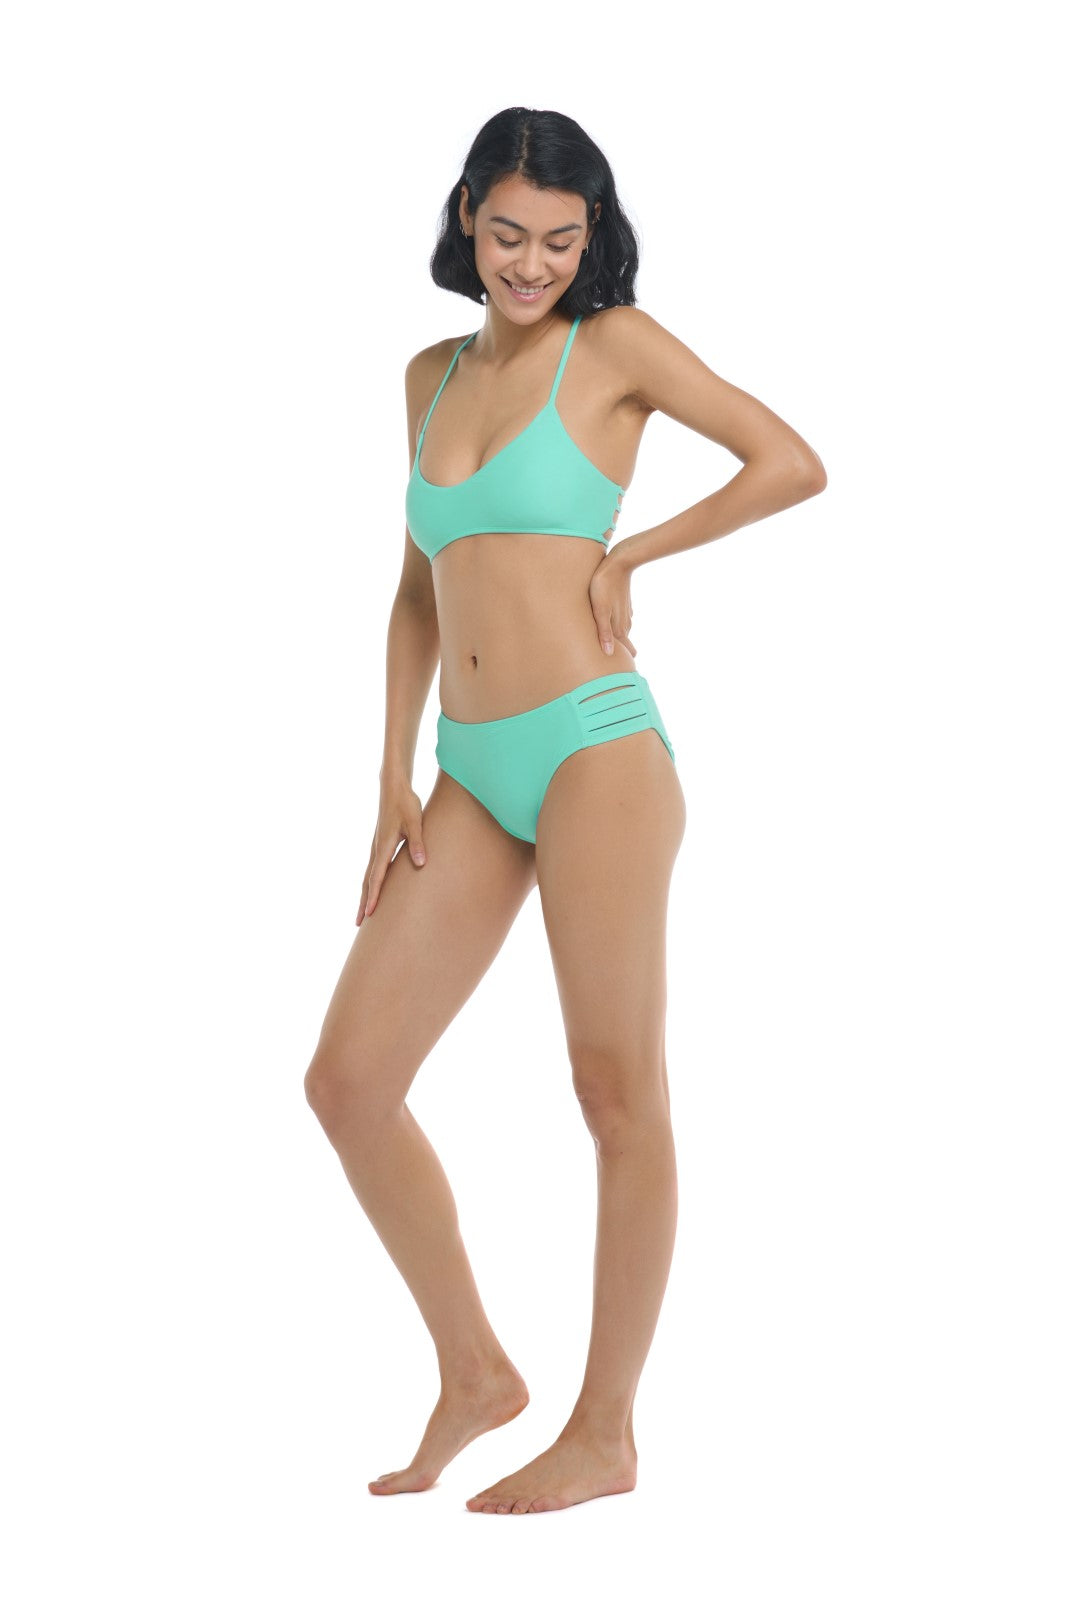 Alani Body Glove Top in Turquoise color